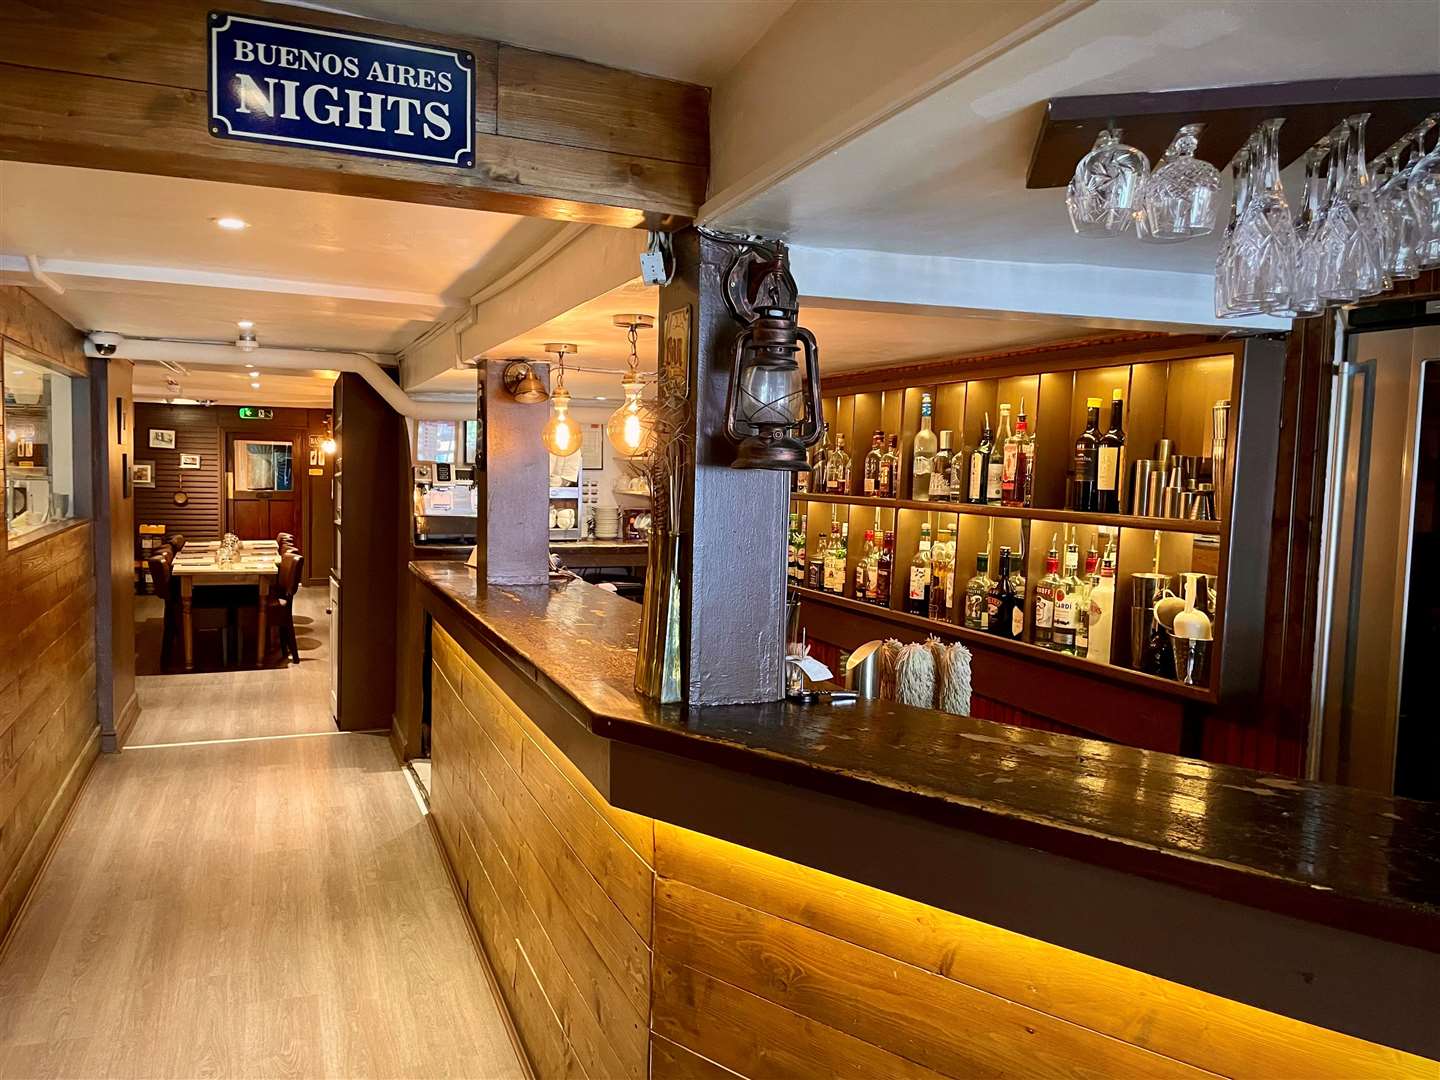 The interior of the Maidstone steakhouse. Picture: Buenos Aires Nights